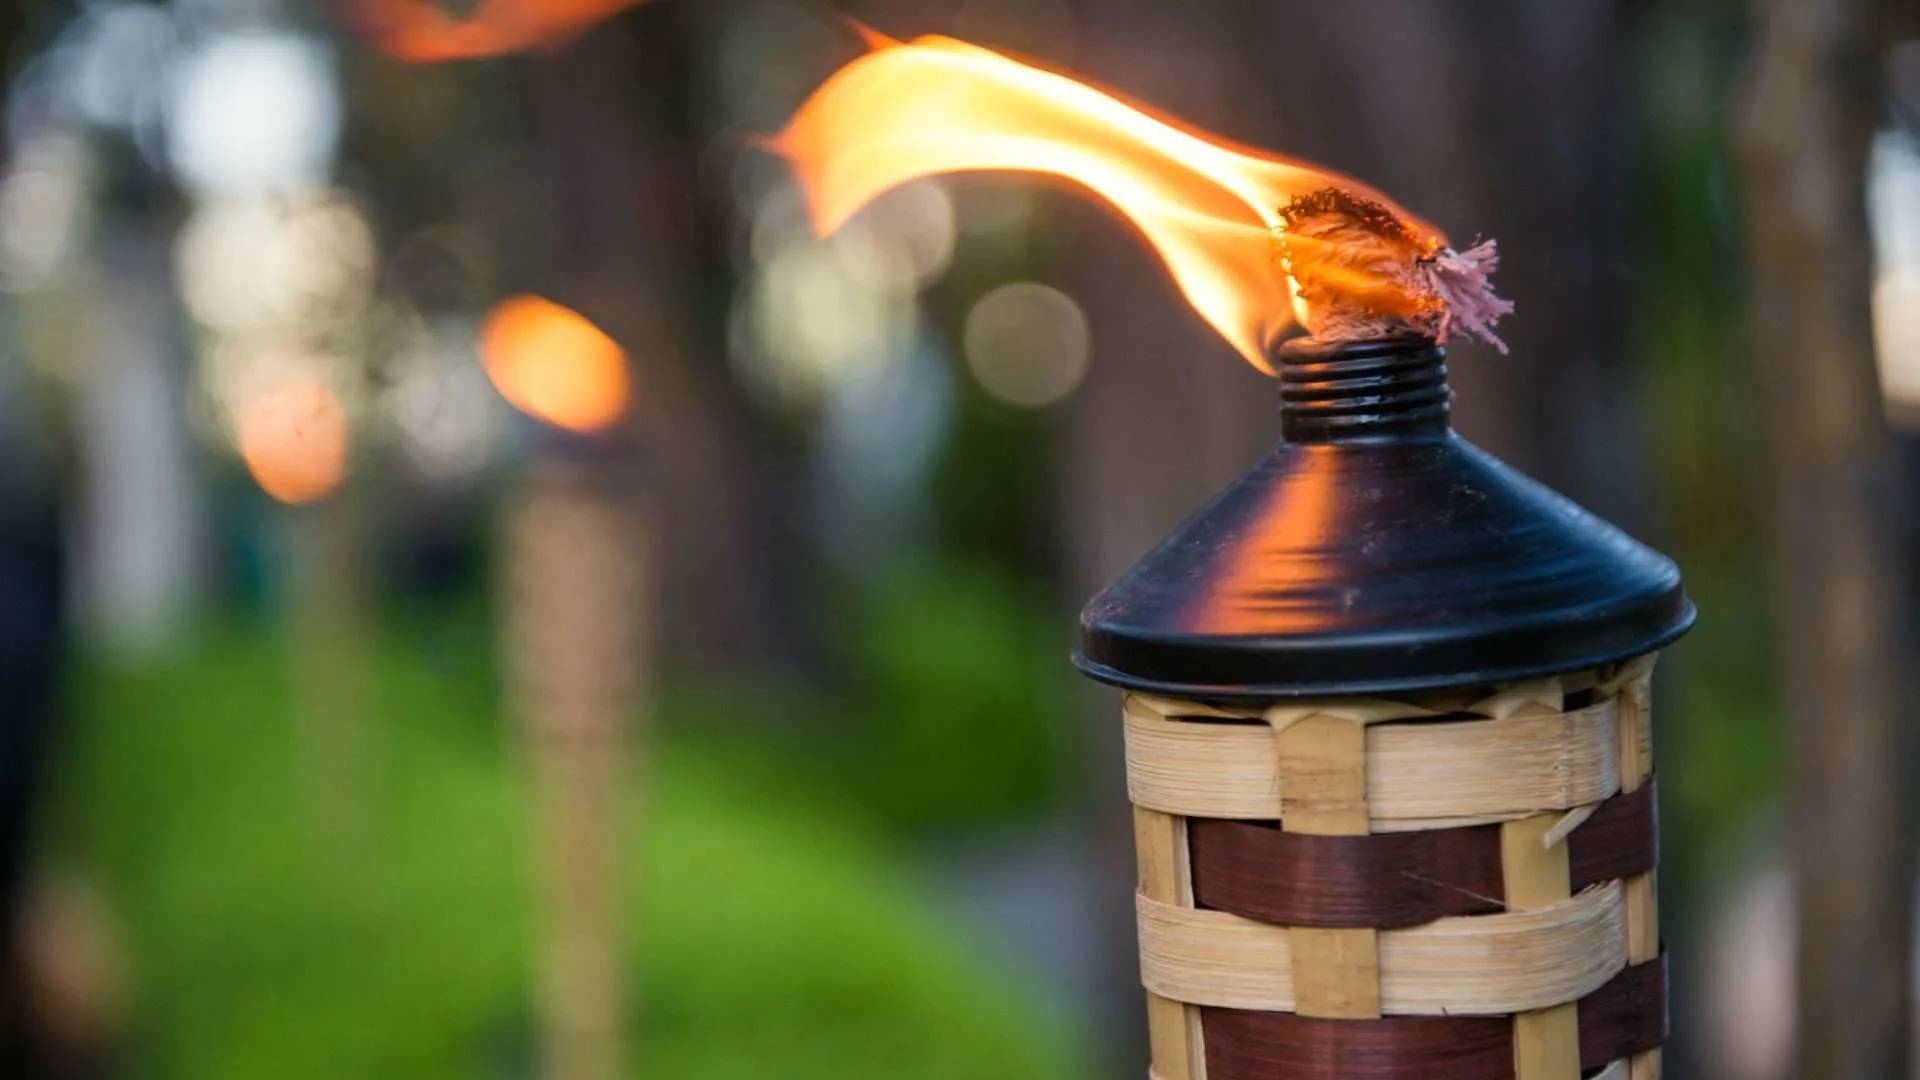 tiki torch for repelling mosquitoes while camping